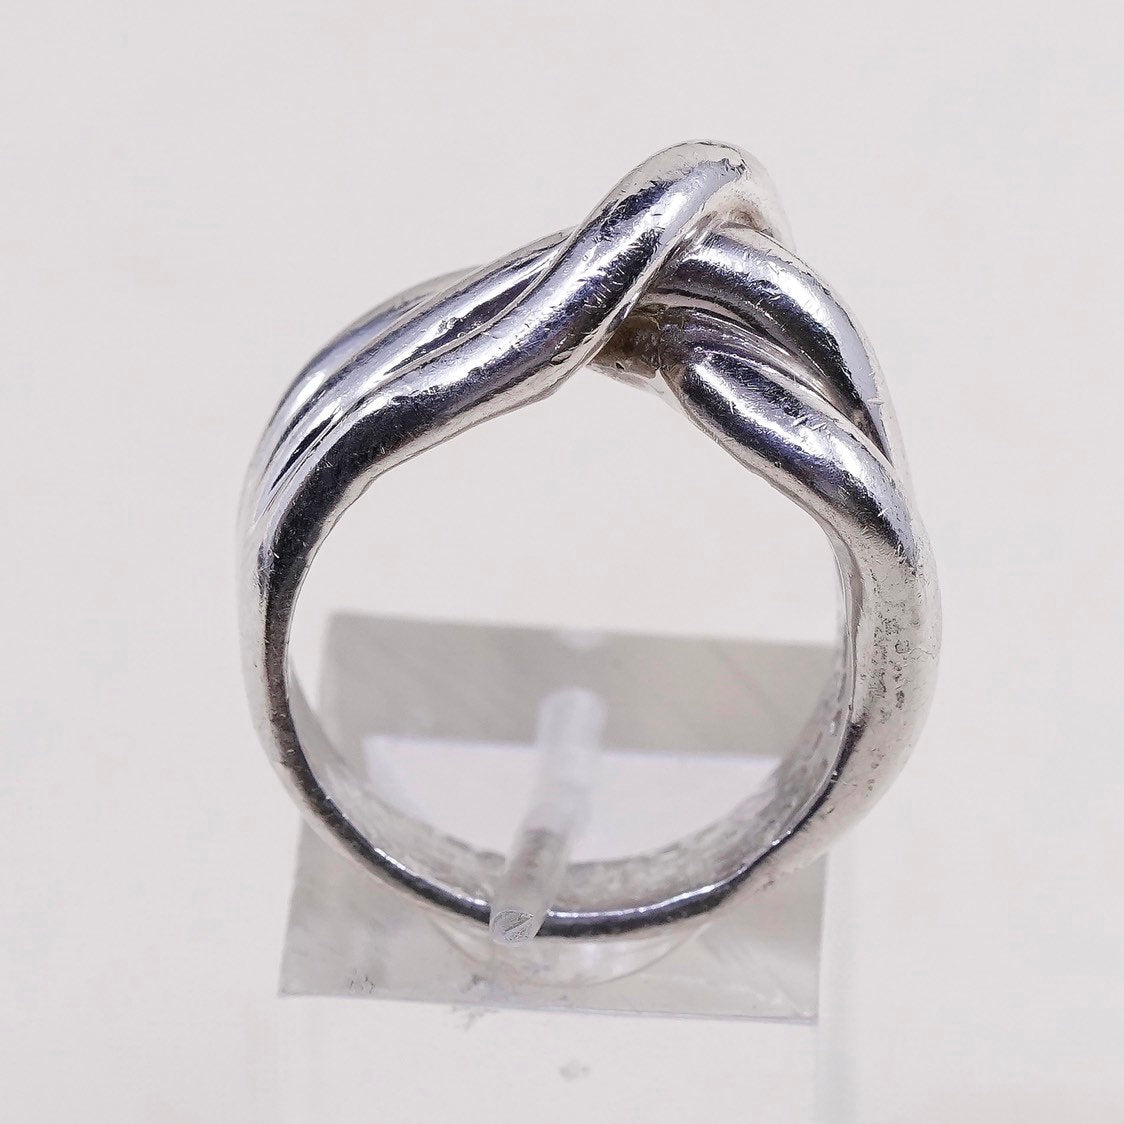 sz 8, vtg sterling silver handmade ring, Mexico 925 ribbed statement band